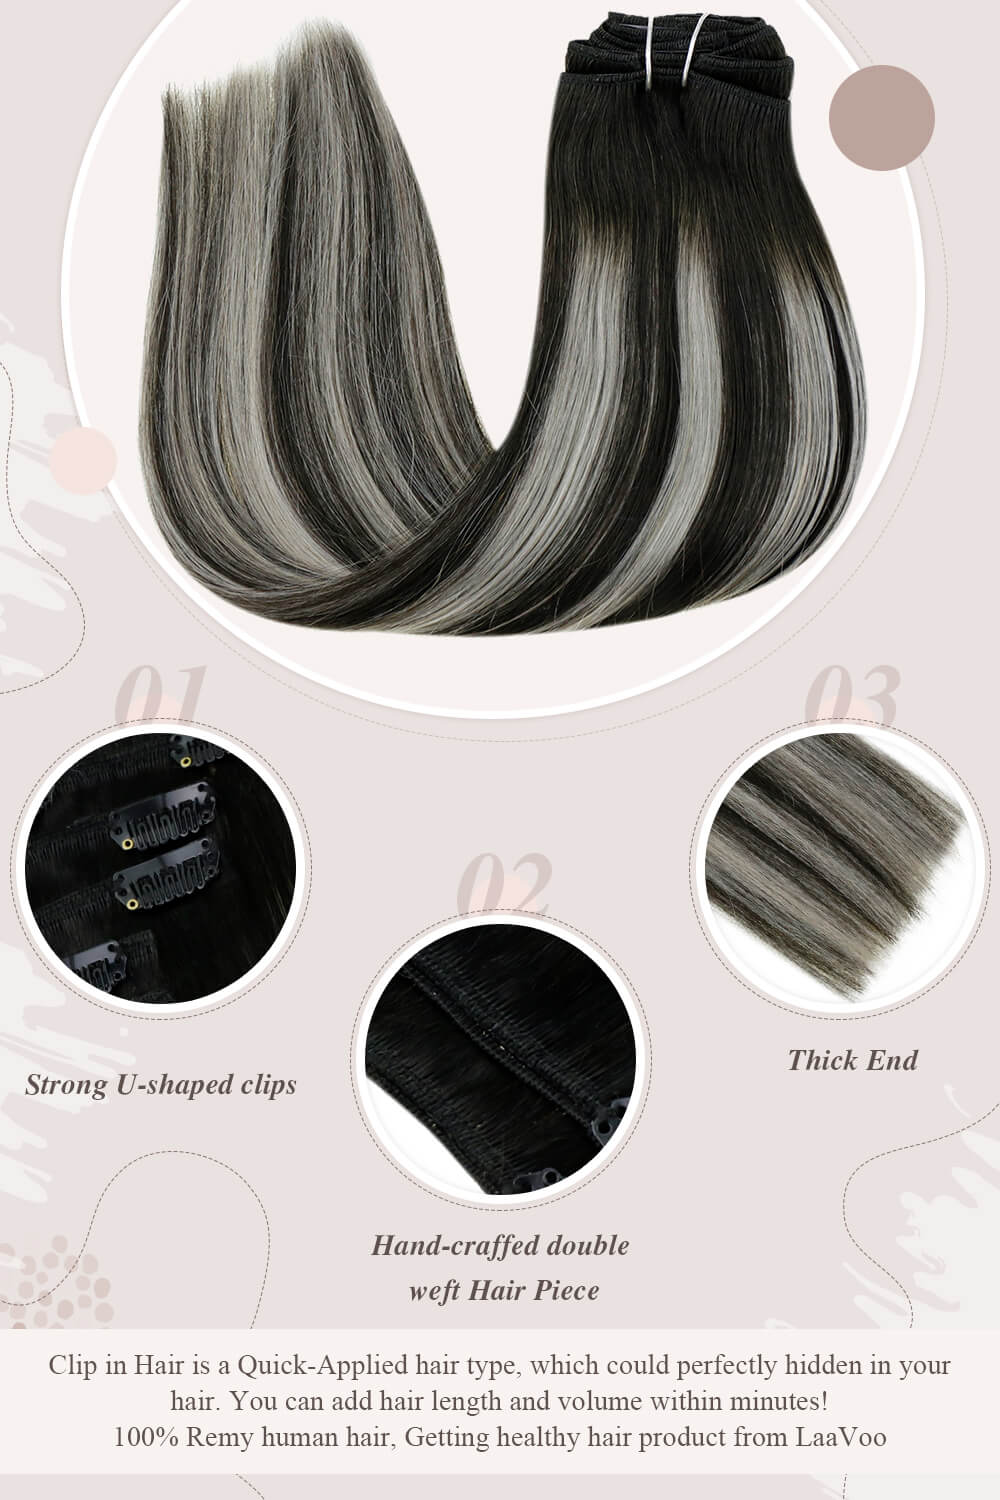 strong U shaped clips hand craffed double weft hair piece thick end clip in hair perfectly hidden in your hair you can add hair length and volume within minutes Remy human hair getting healthy hair product